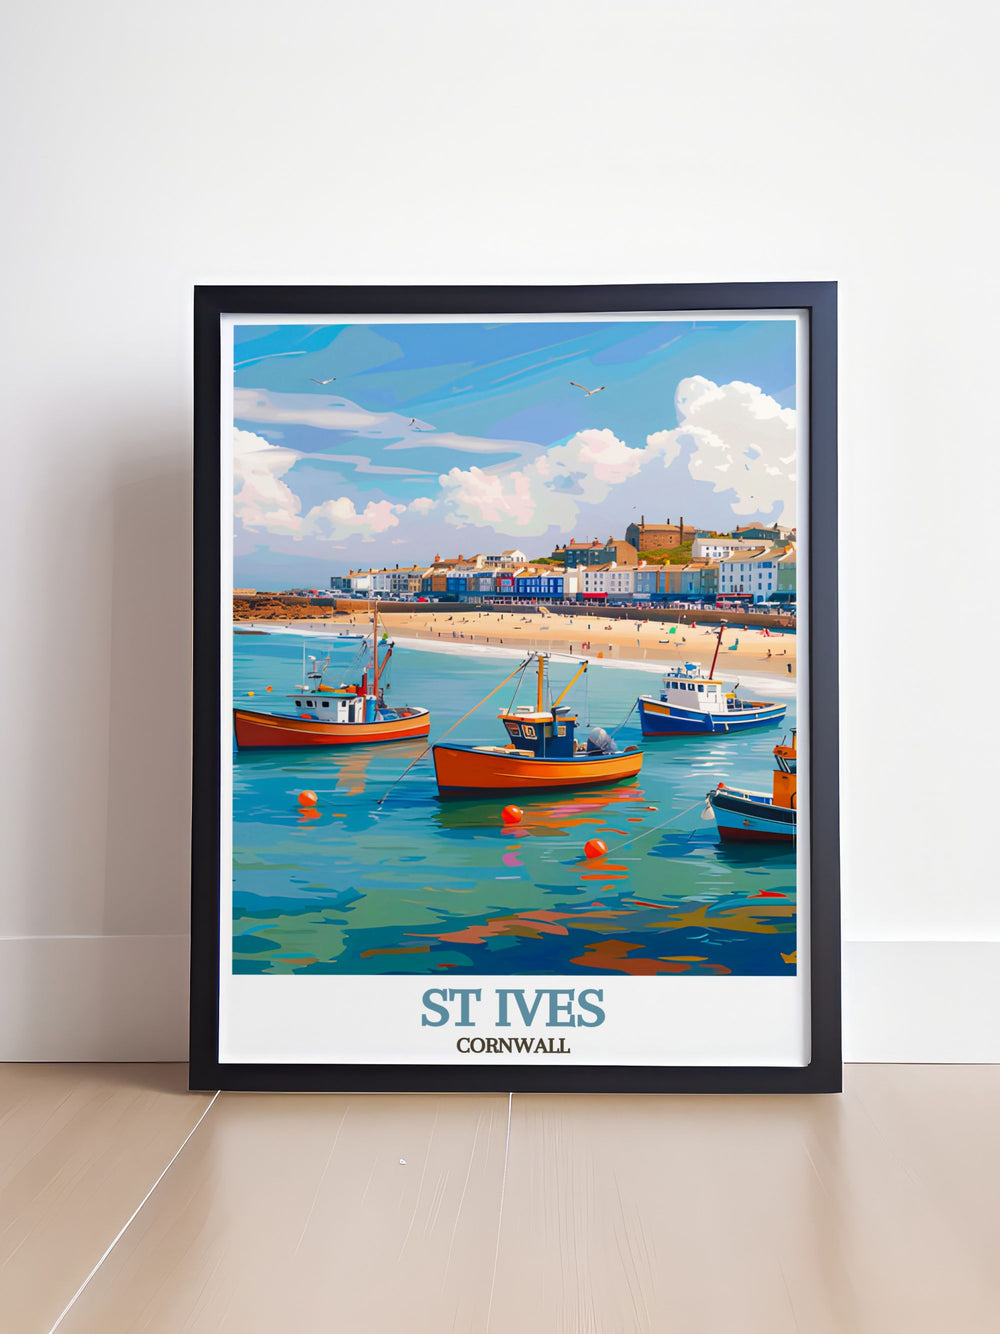 The vibrant scenes of St Ives Harbour are depicted in this travel poster, showcasing the natural beauty and cultural richness that define Cornwall.